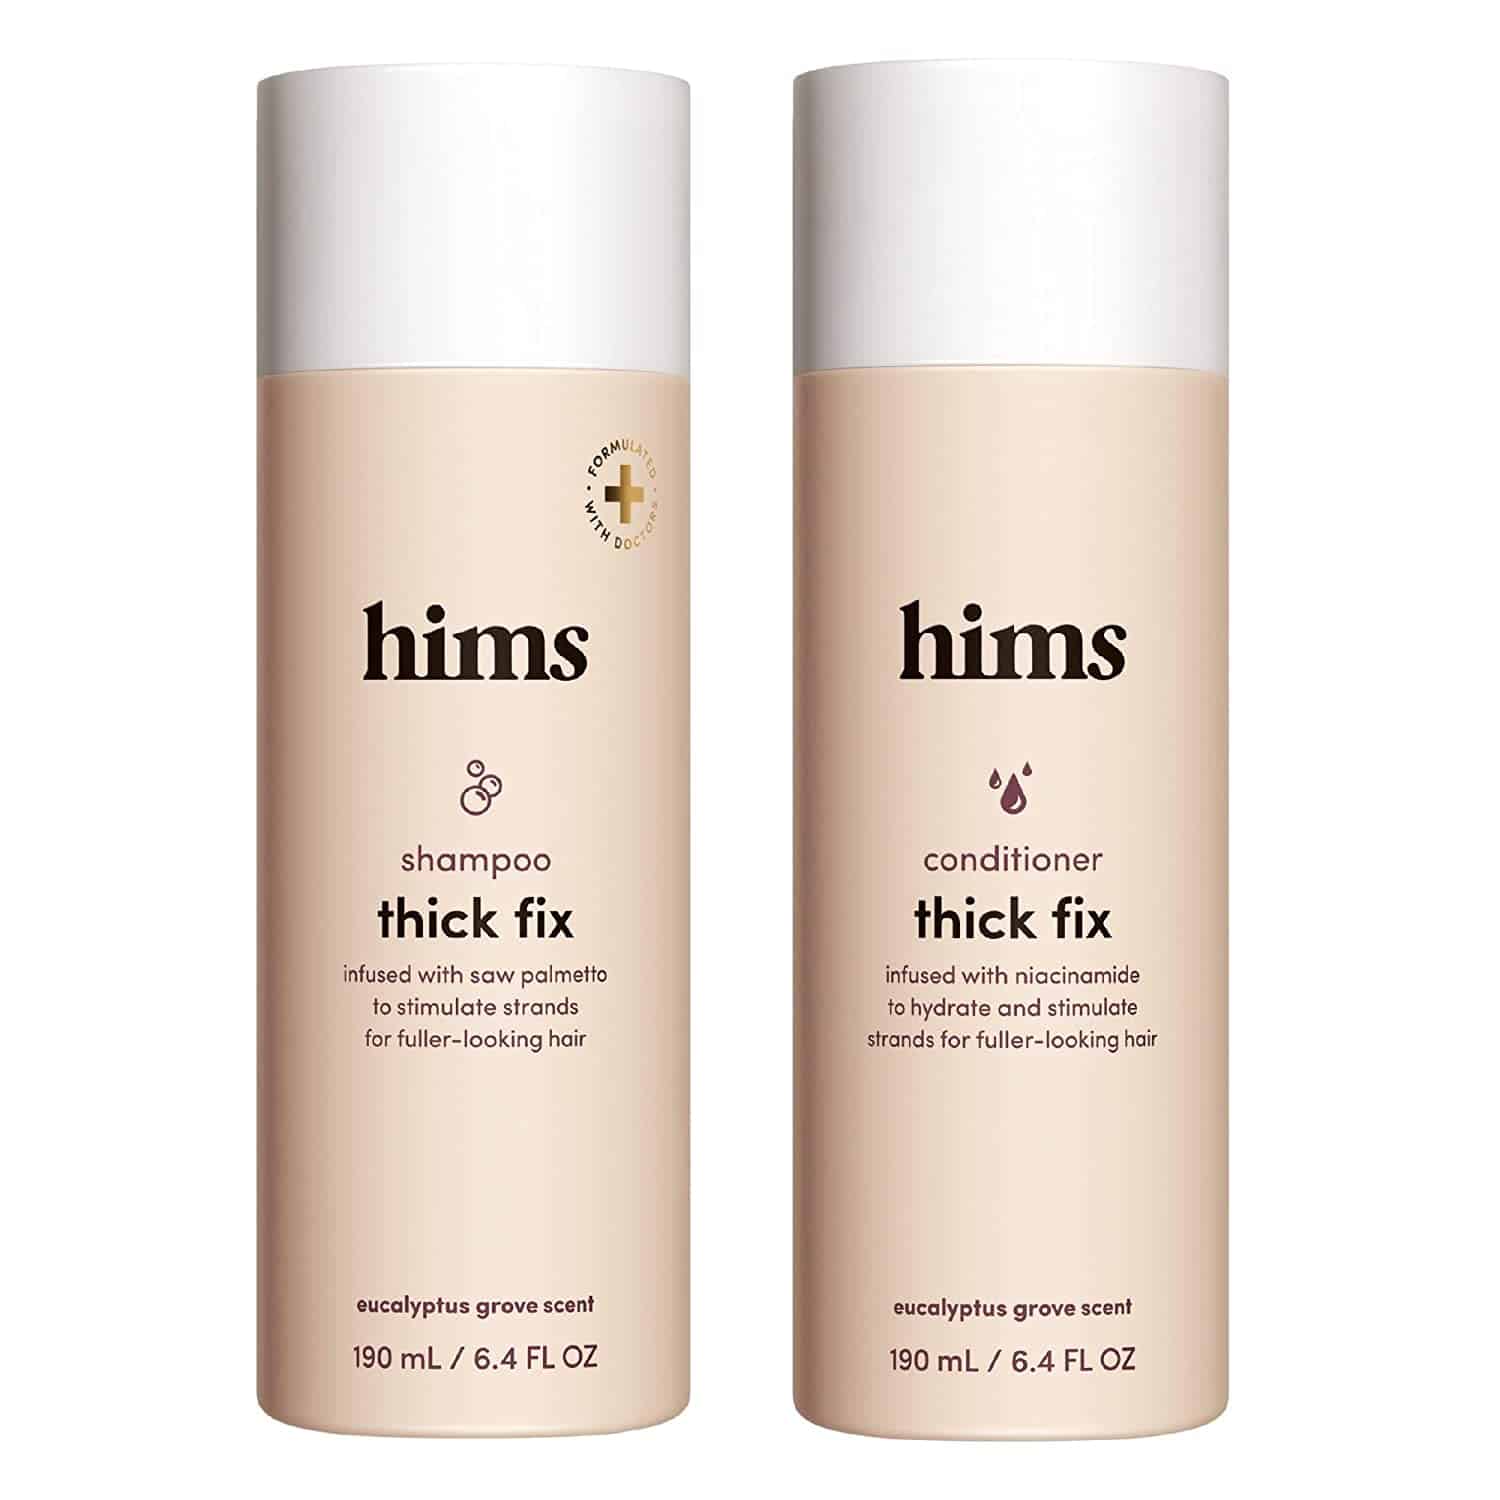 hims Thick Fix Shampoo and Conditioner Set for Men